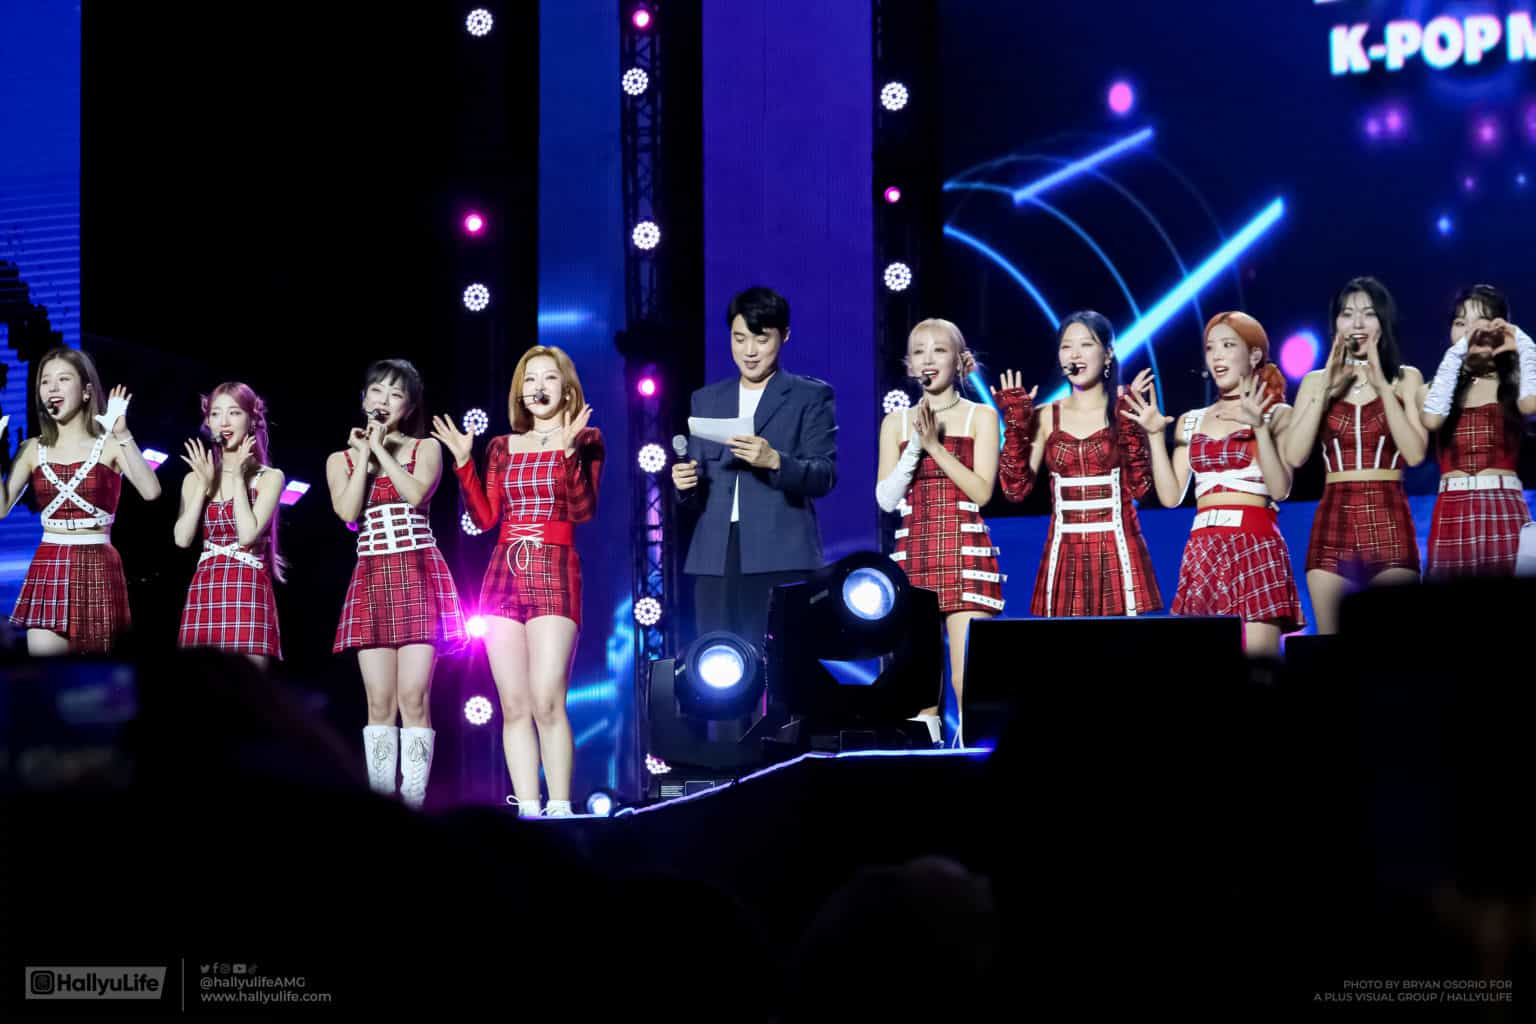 When K-pop meets P-pop: What went on at #POPSTIVAL2022? | Filipino News ...